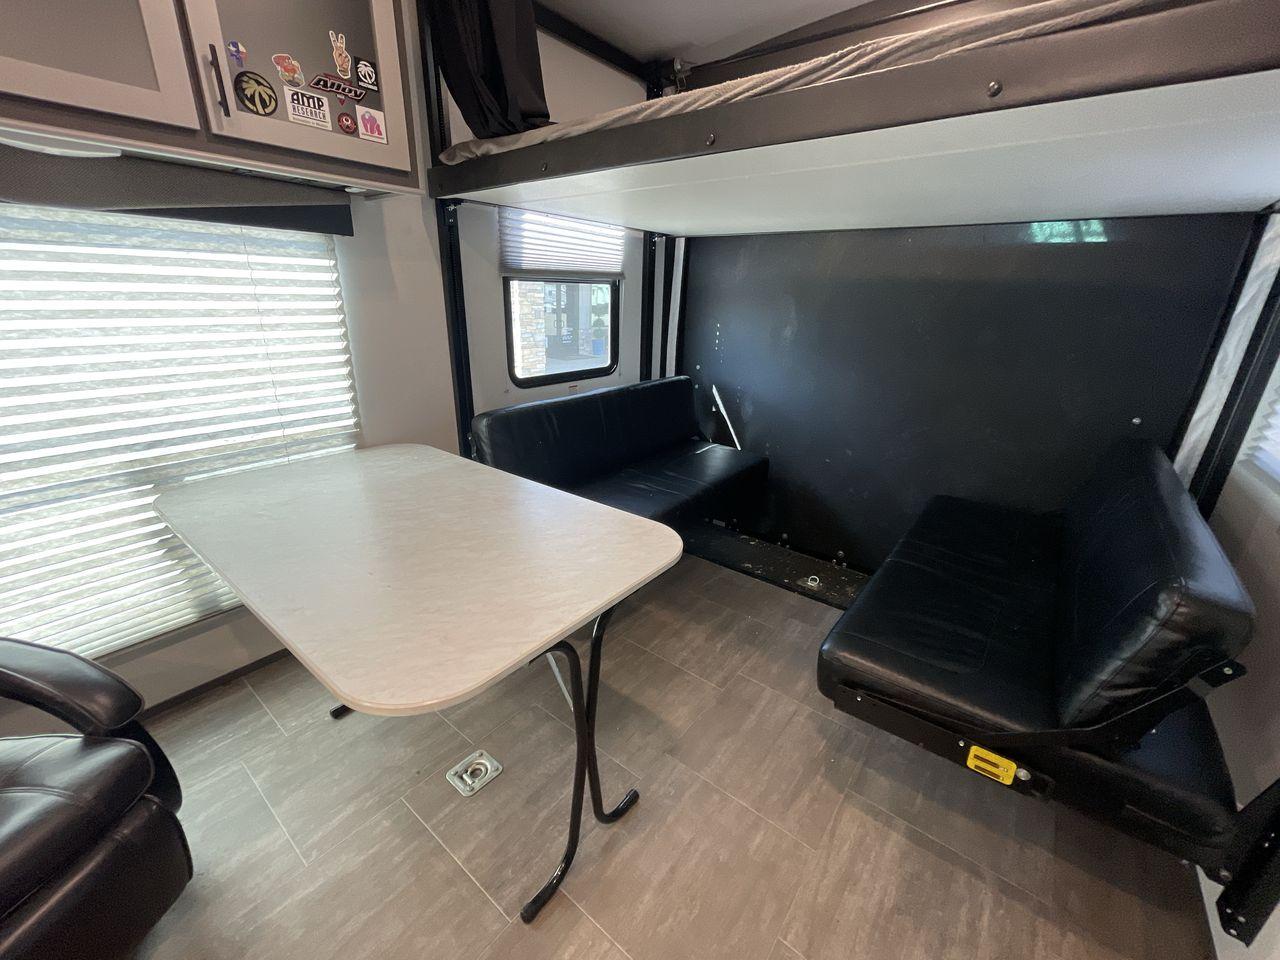 2021 CRUISER RV STRYKER 3414 (5RXGB392XM1) , Length: 38.75 ft. | Dry Weight: 9,608 lbs. | Gross Weight: 12,800 lbs. | Slides: 2 transmission, located at 4319 N Main St, Cleburne, TX, 76033, (817) 678-5133, 32.385960, -97.391212 - The 2021 Cruiser RV Stryker 3414 is a meticulously crafted toy hauler that seamlessly integrates luxury, versatility, and durability to provide an exceptional on-the-road experience. Whether you're a passionate thrill-seeker indulging in outdoor sports or a discerning family seeking comfort, the Str - Photo #13